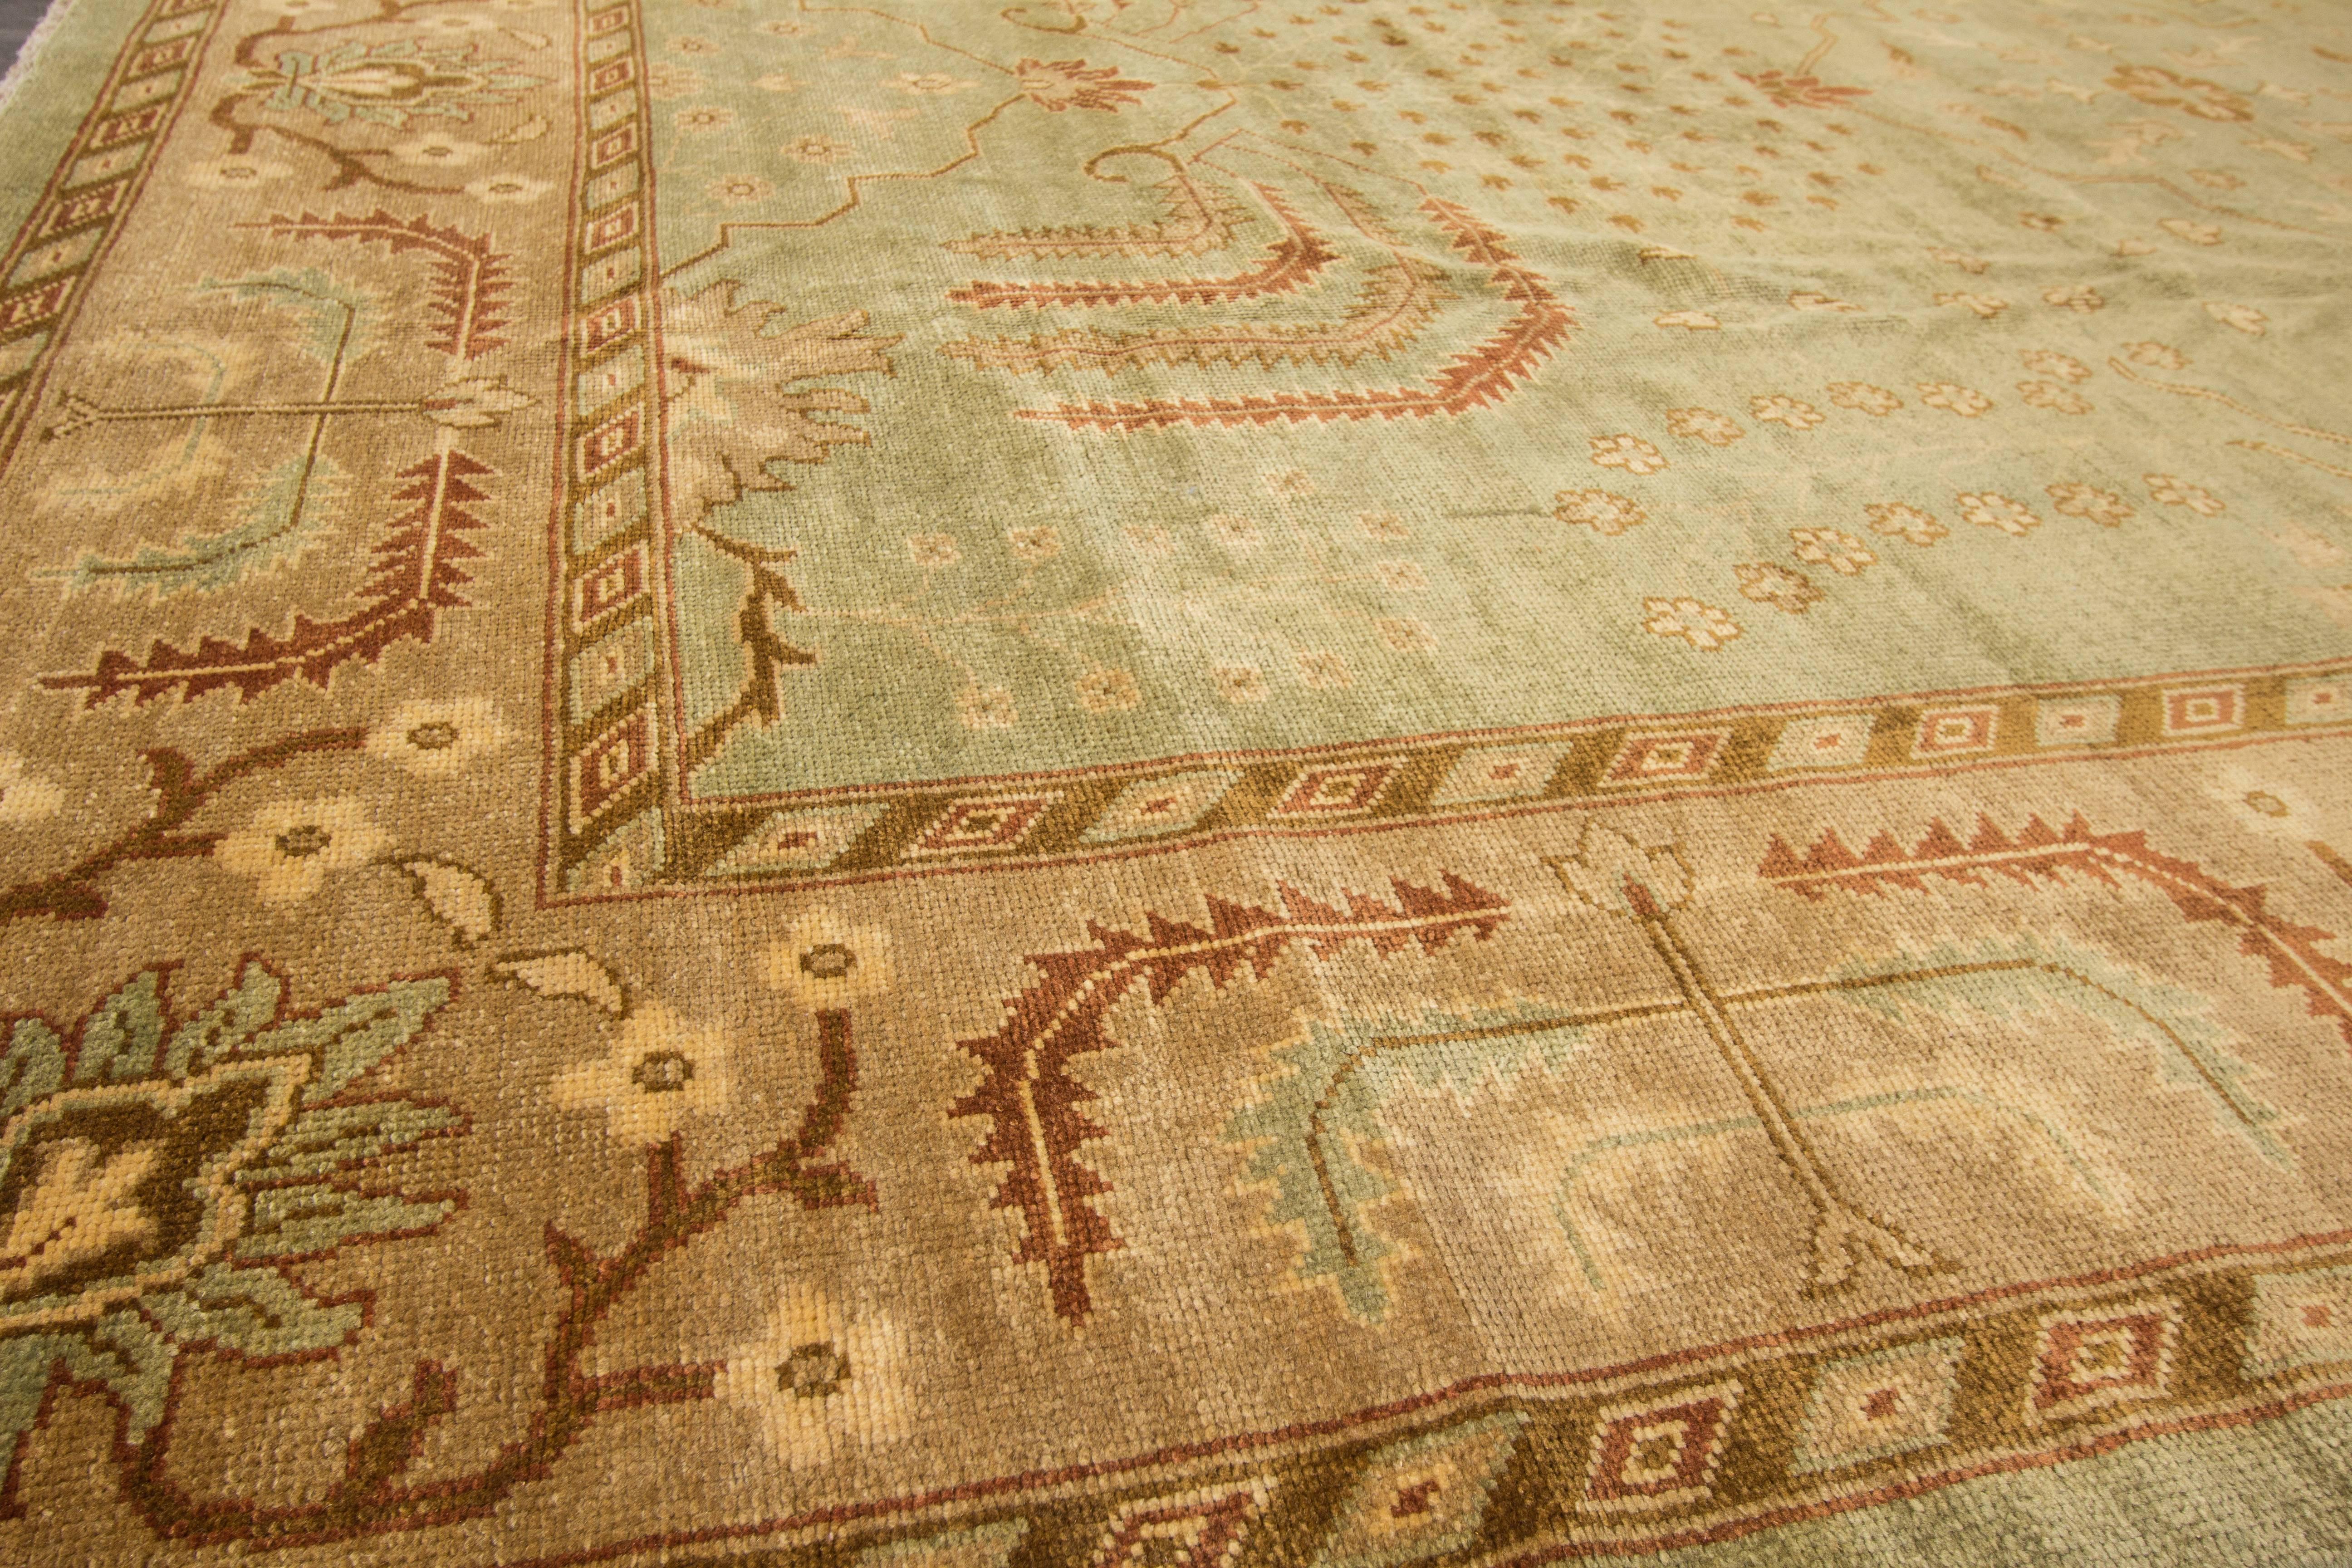 Hand-knotted rug with a floral and medallion design on a green field with beige borders. Measures: 9'10